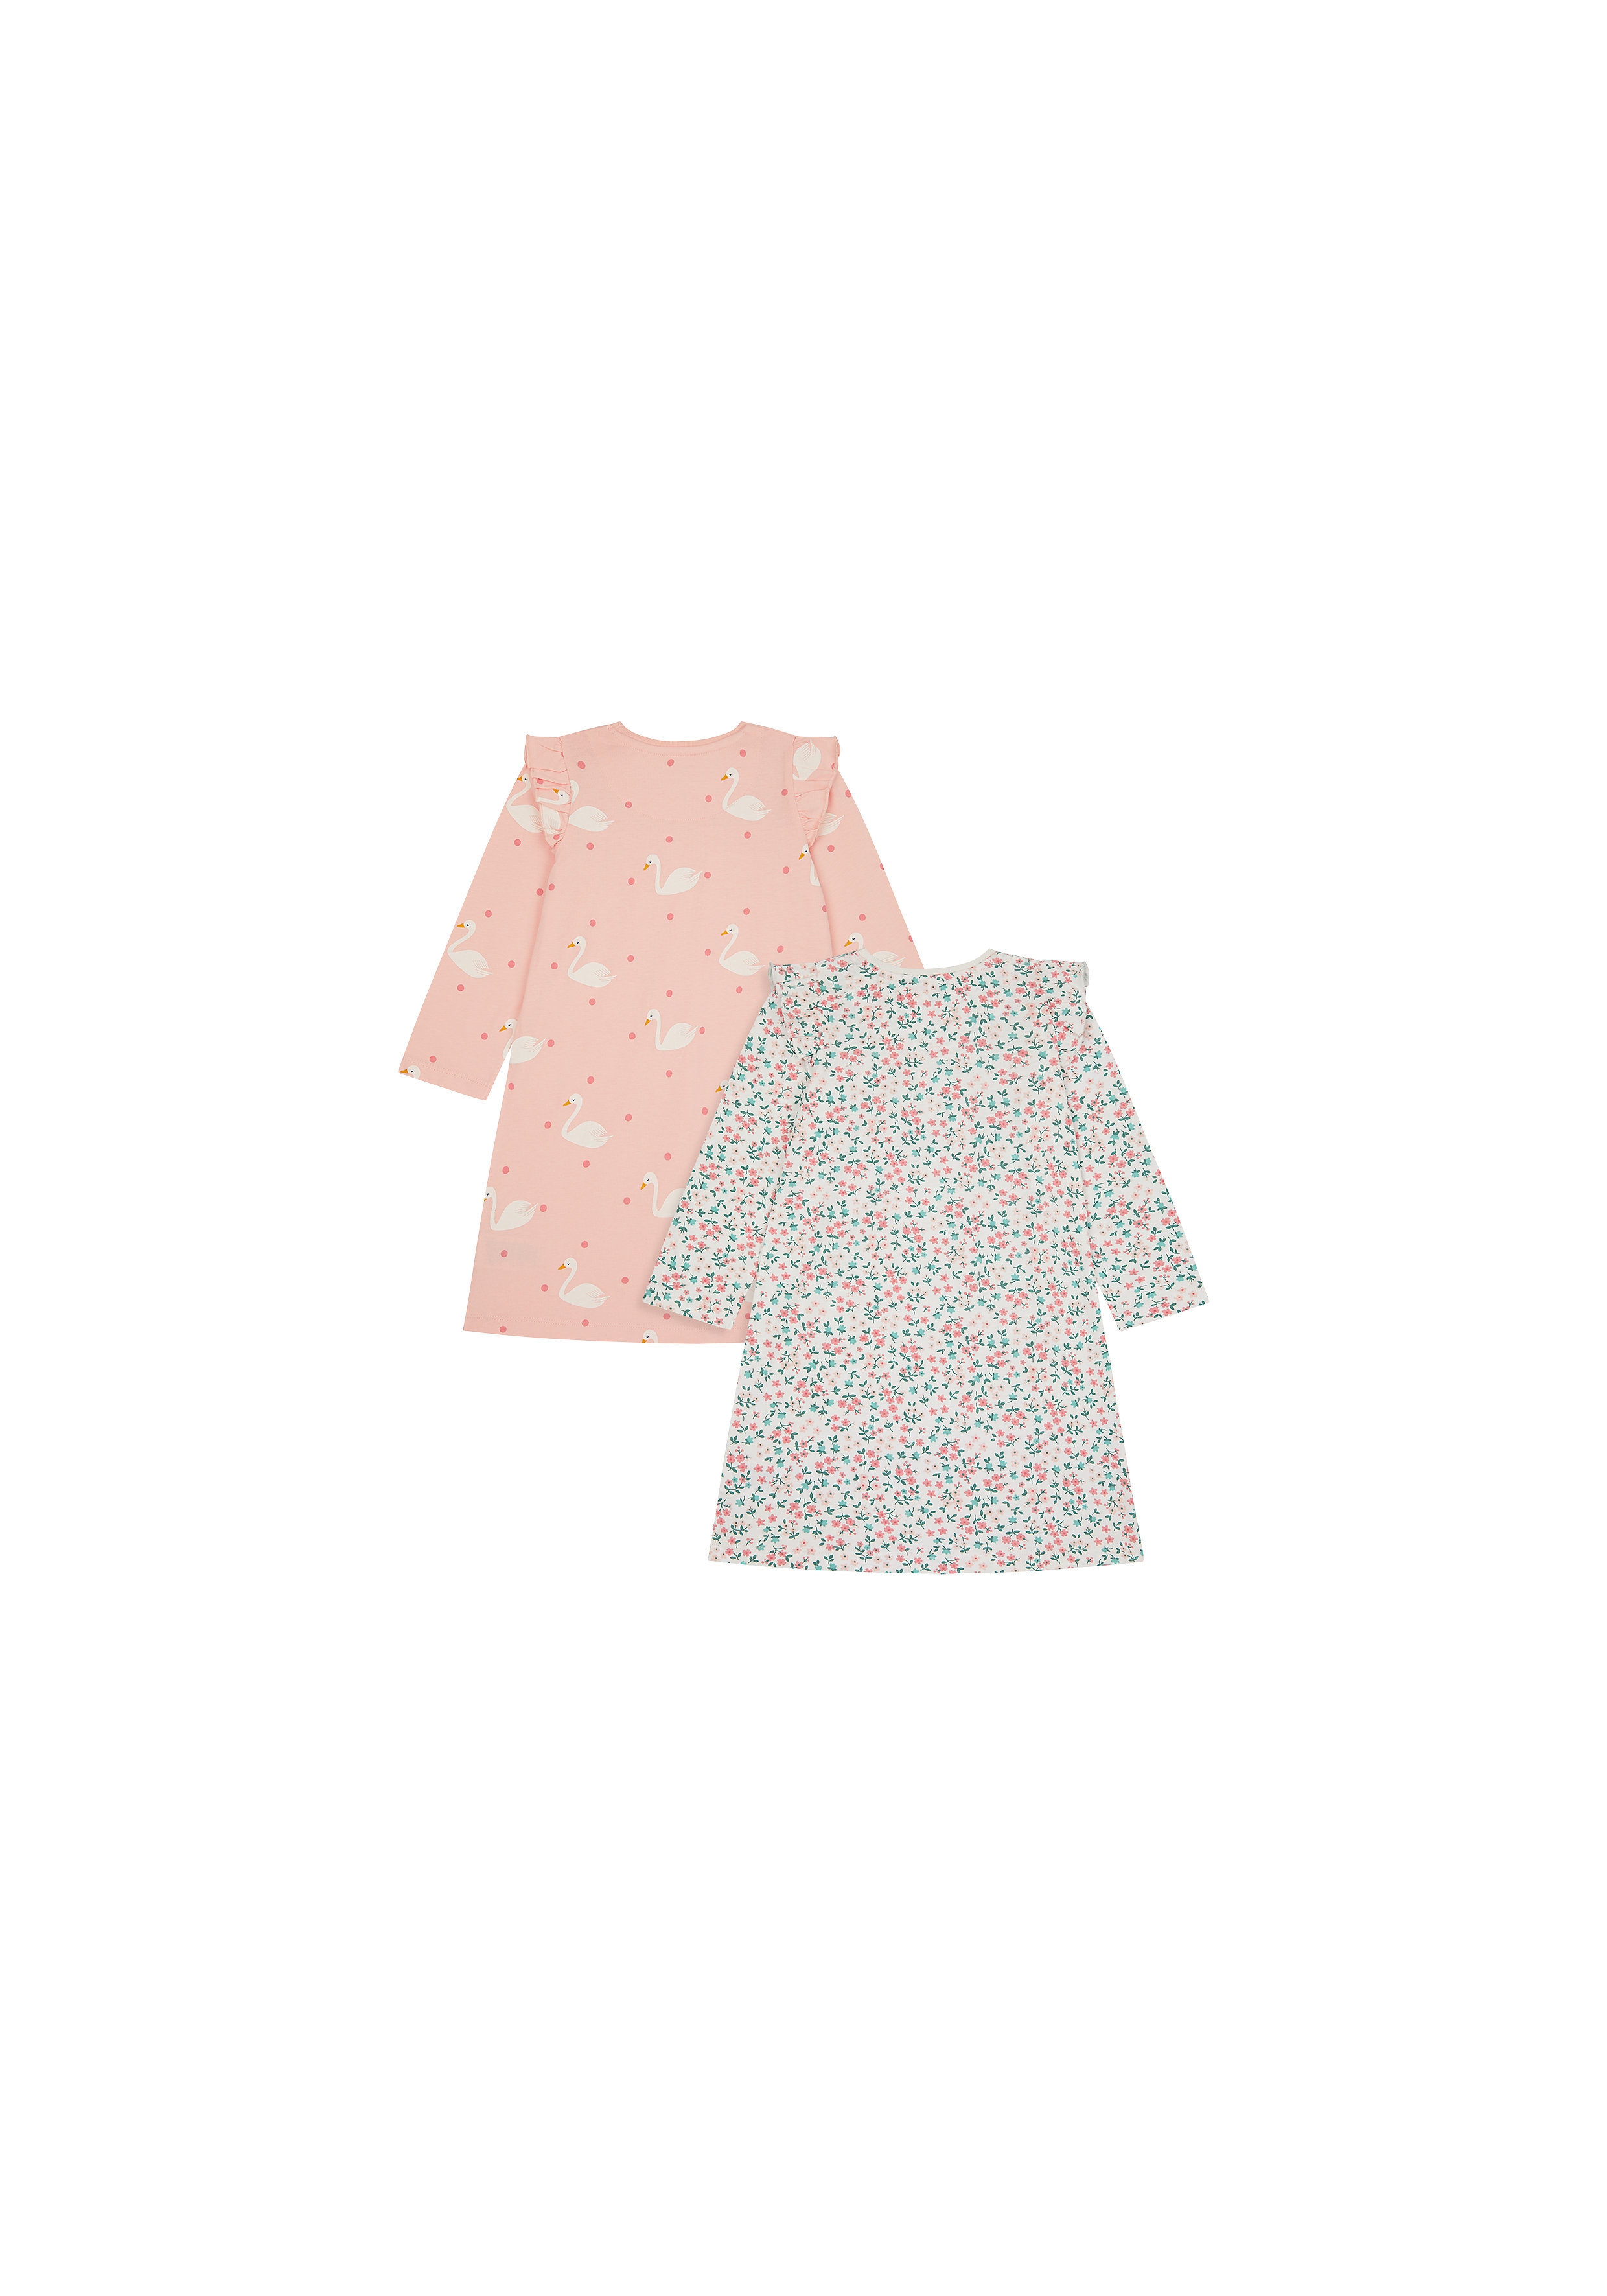 Mothercare | Girls Full Sleeves Nightdress Floral And Swan Print - Pack Of 2 - Pink White 1